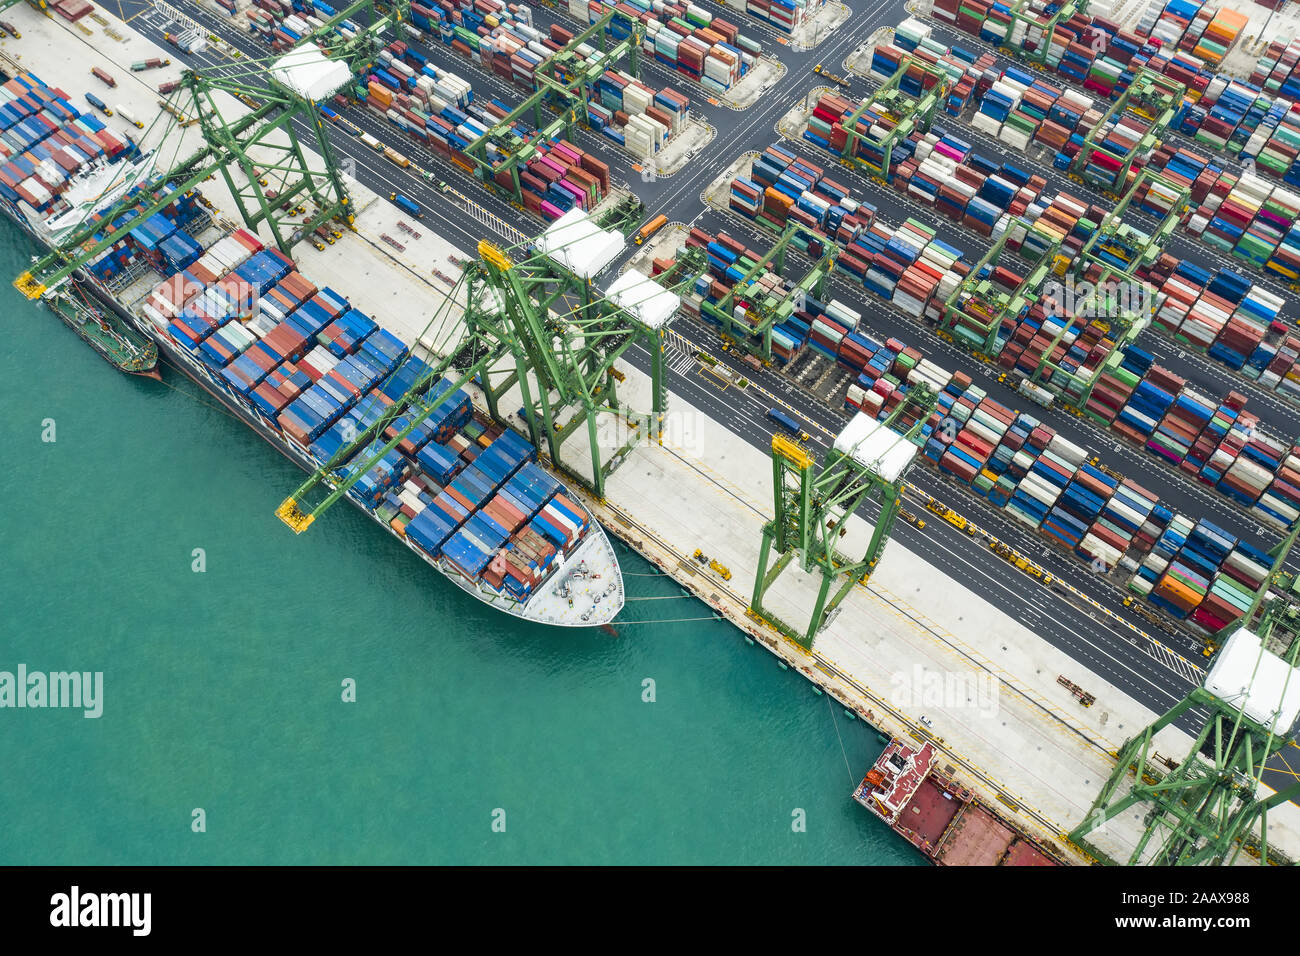 View from above, stunning aerial view of the port of Singapore with hundreds of colored containers ready to be loading on the cargo ships. Stock Photo